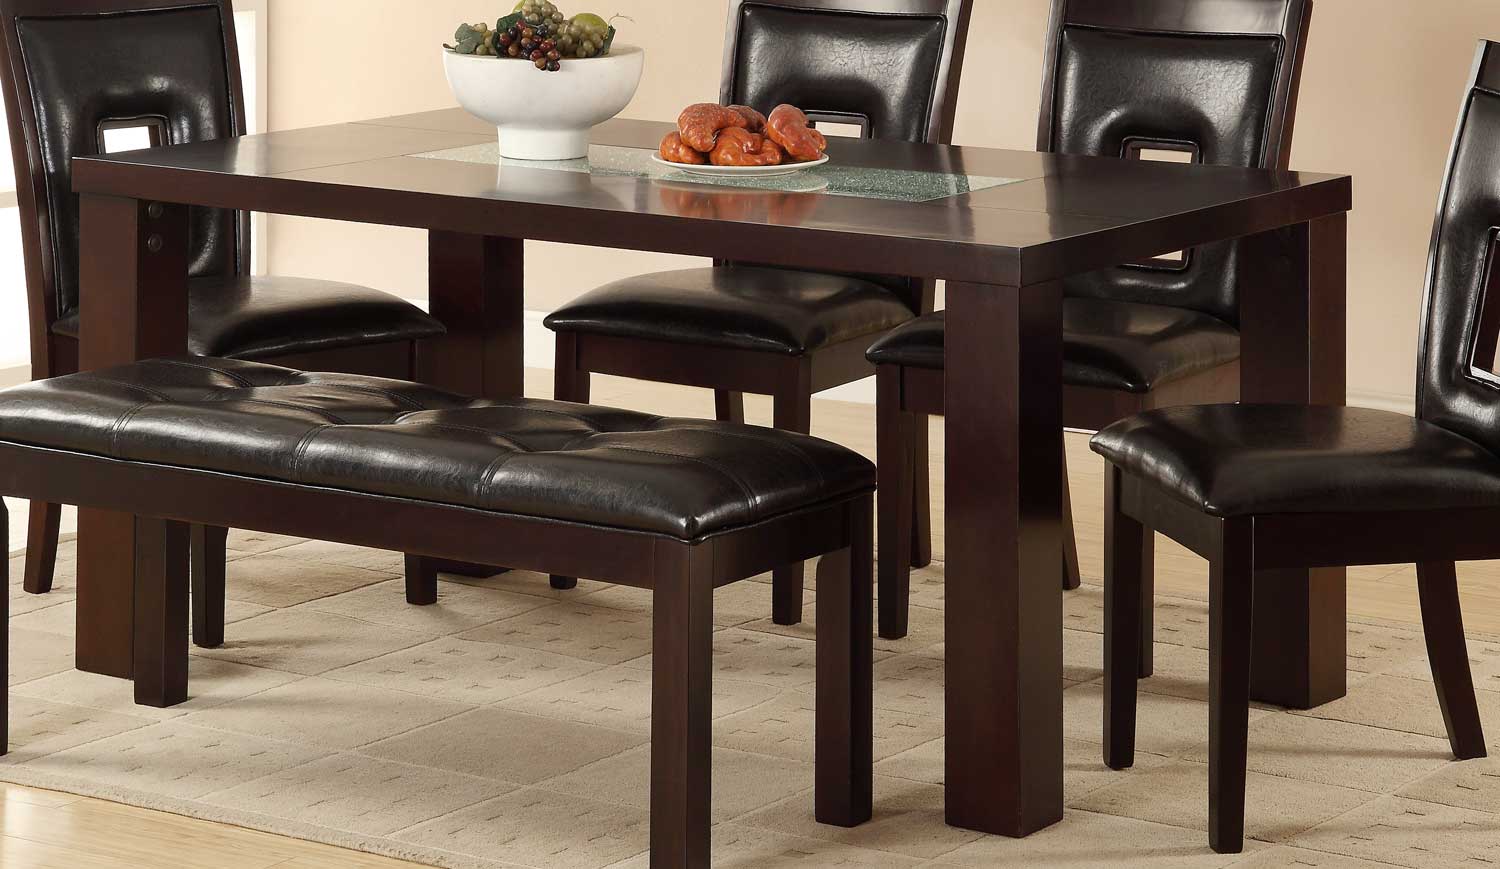 Homelegance Lee Dining Table Espresso, Dining Room Table With Insert